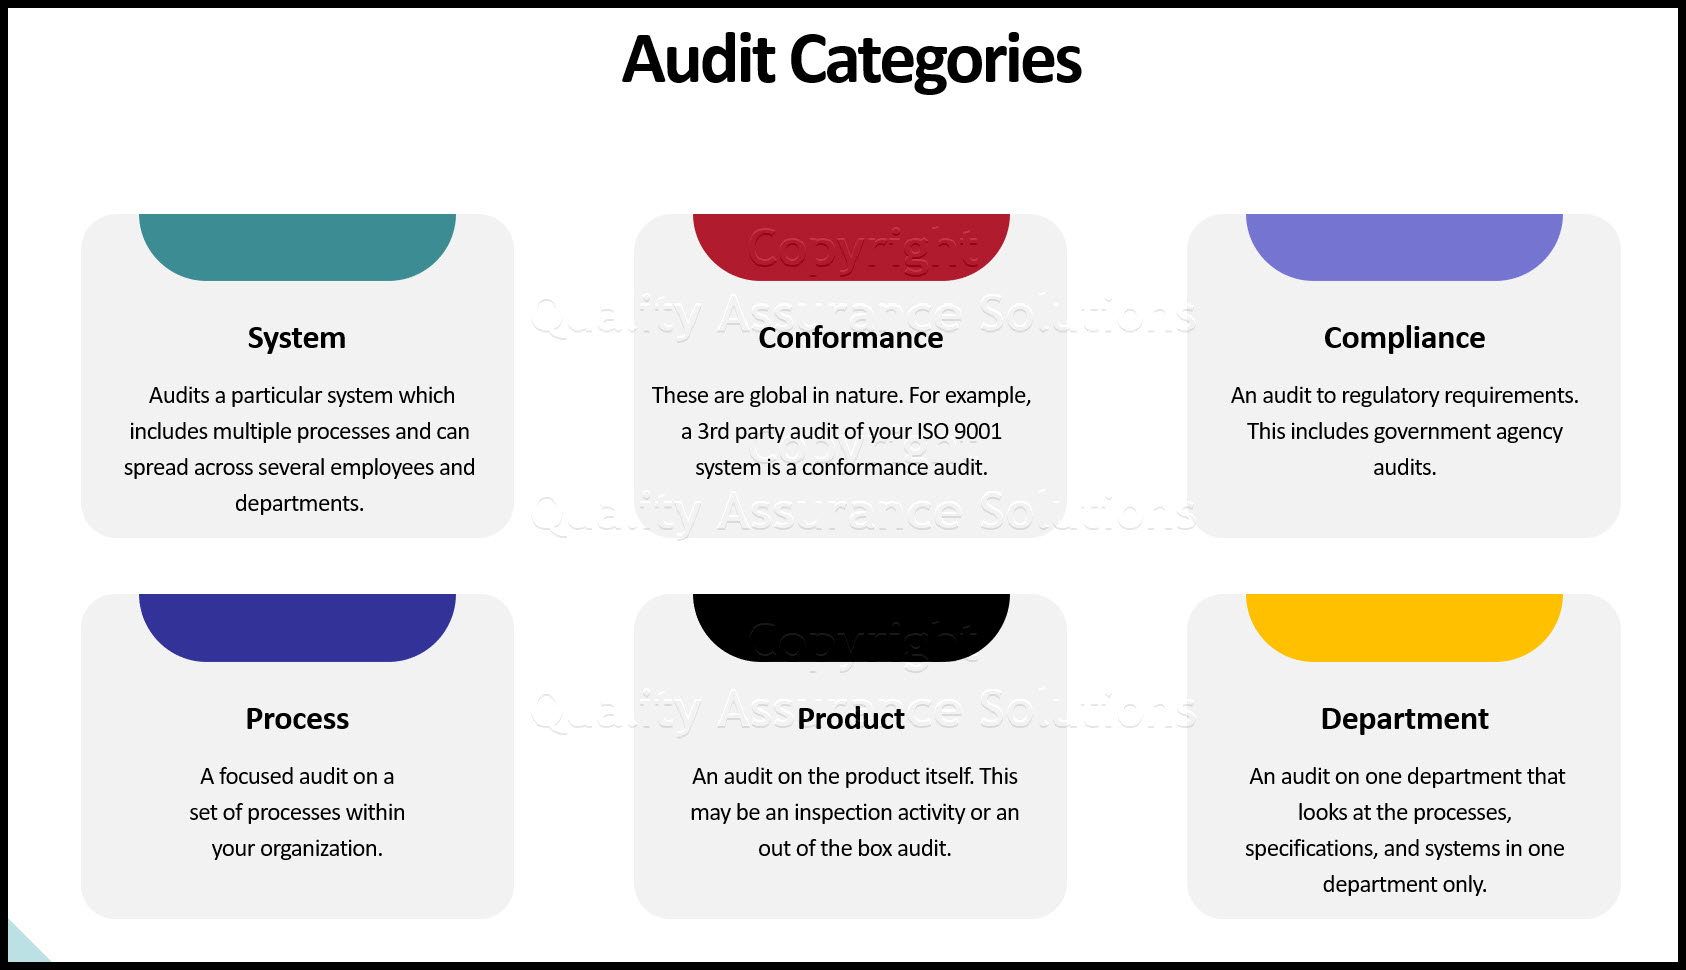 The quality audit checklist is a key element of the quality audit. Quality audits are necessary for ISO 9001, the QA program and continuous improvement.